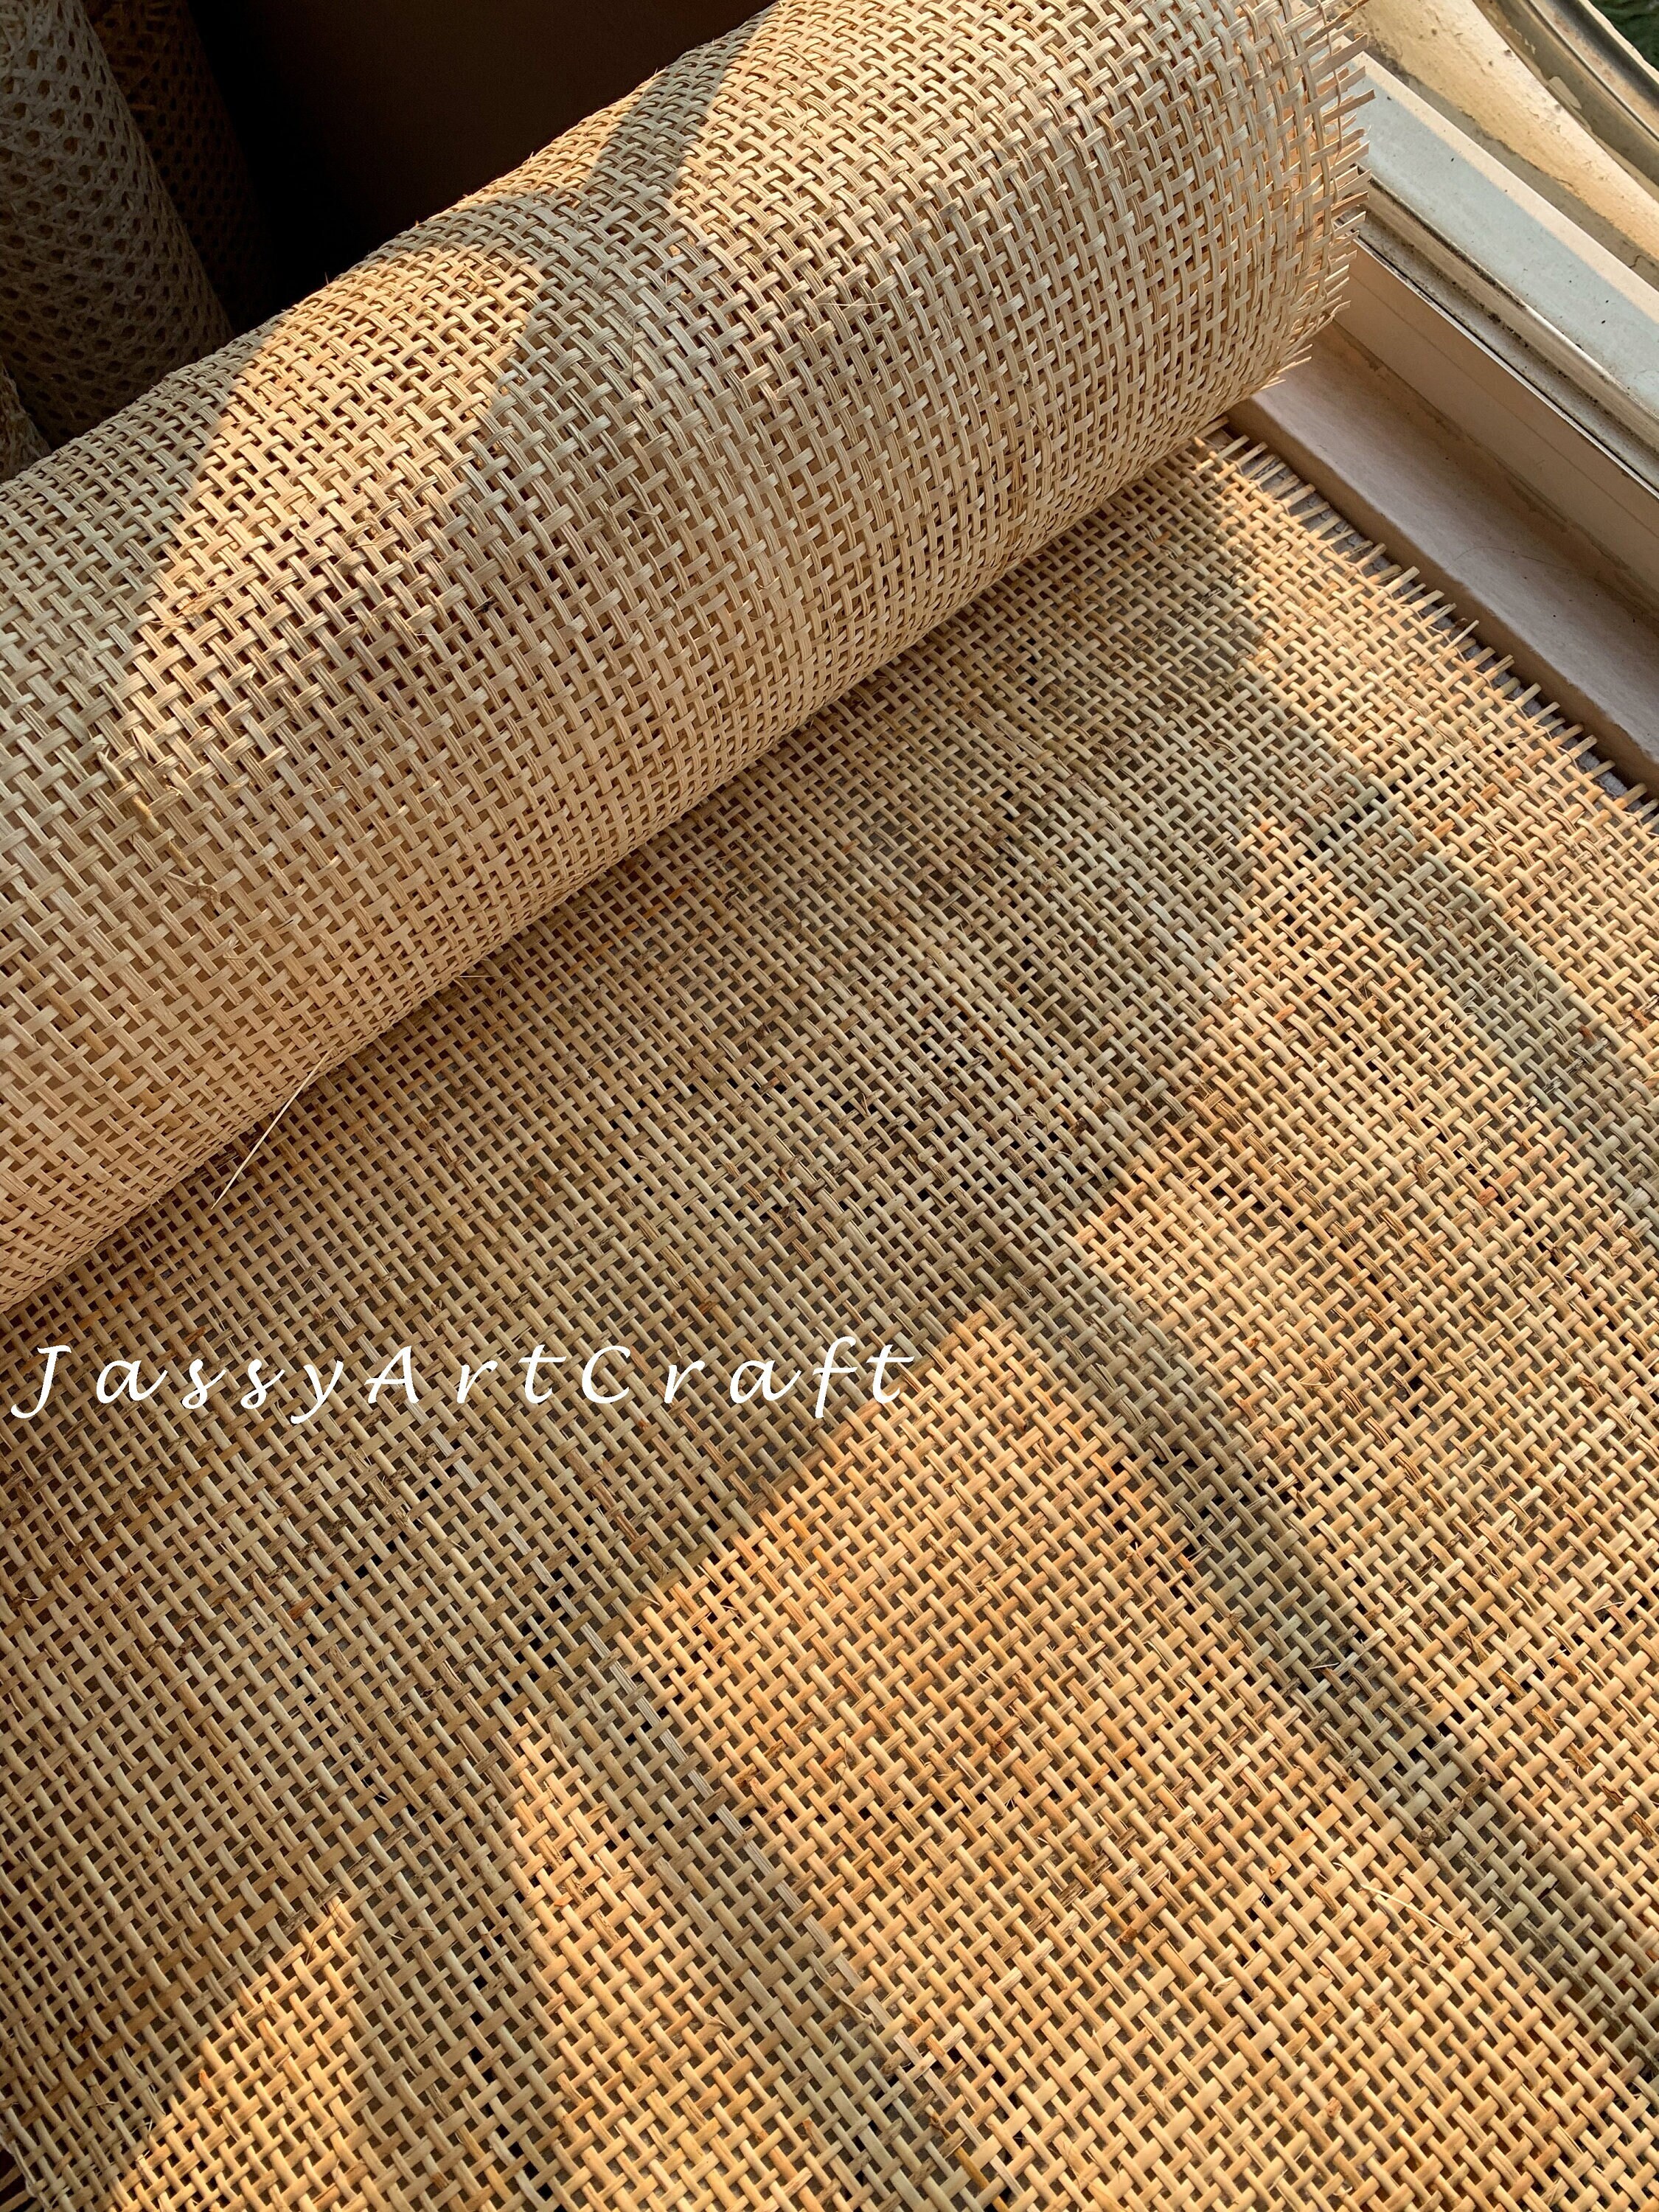 36 Wide Semi-Bleached Rattan Square Cane Webbing Radio Mesh Caning